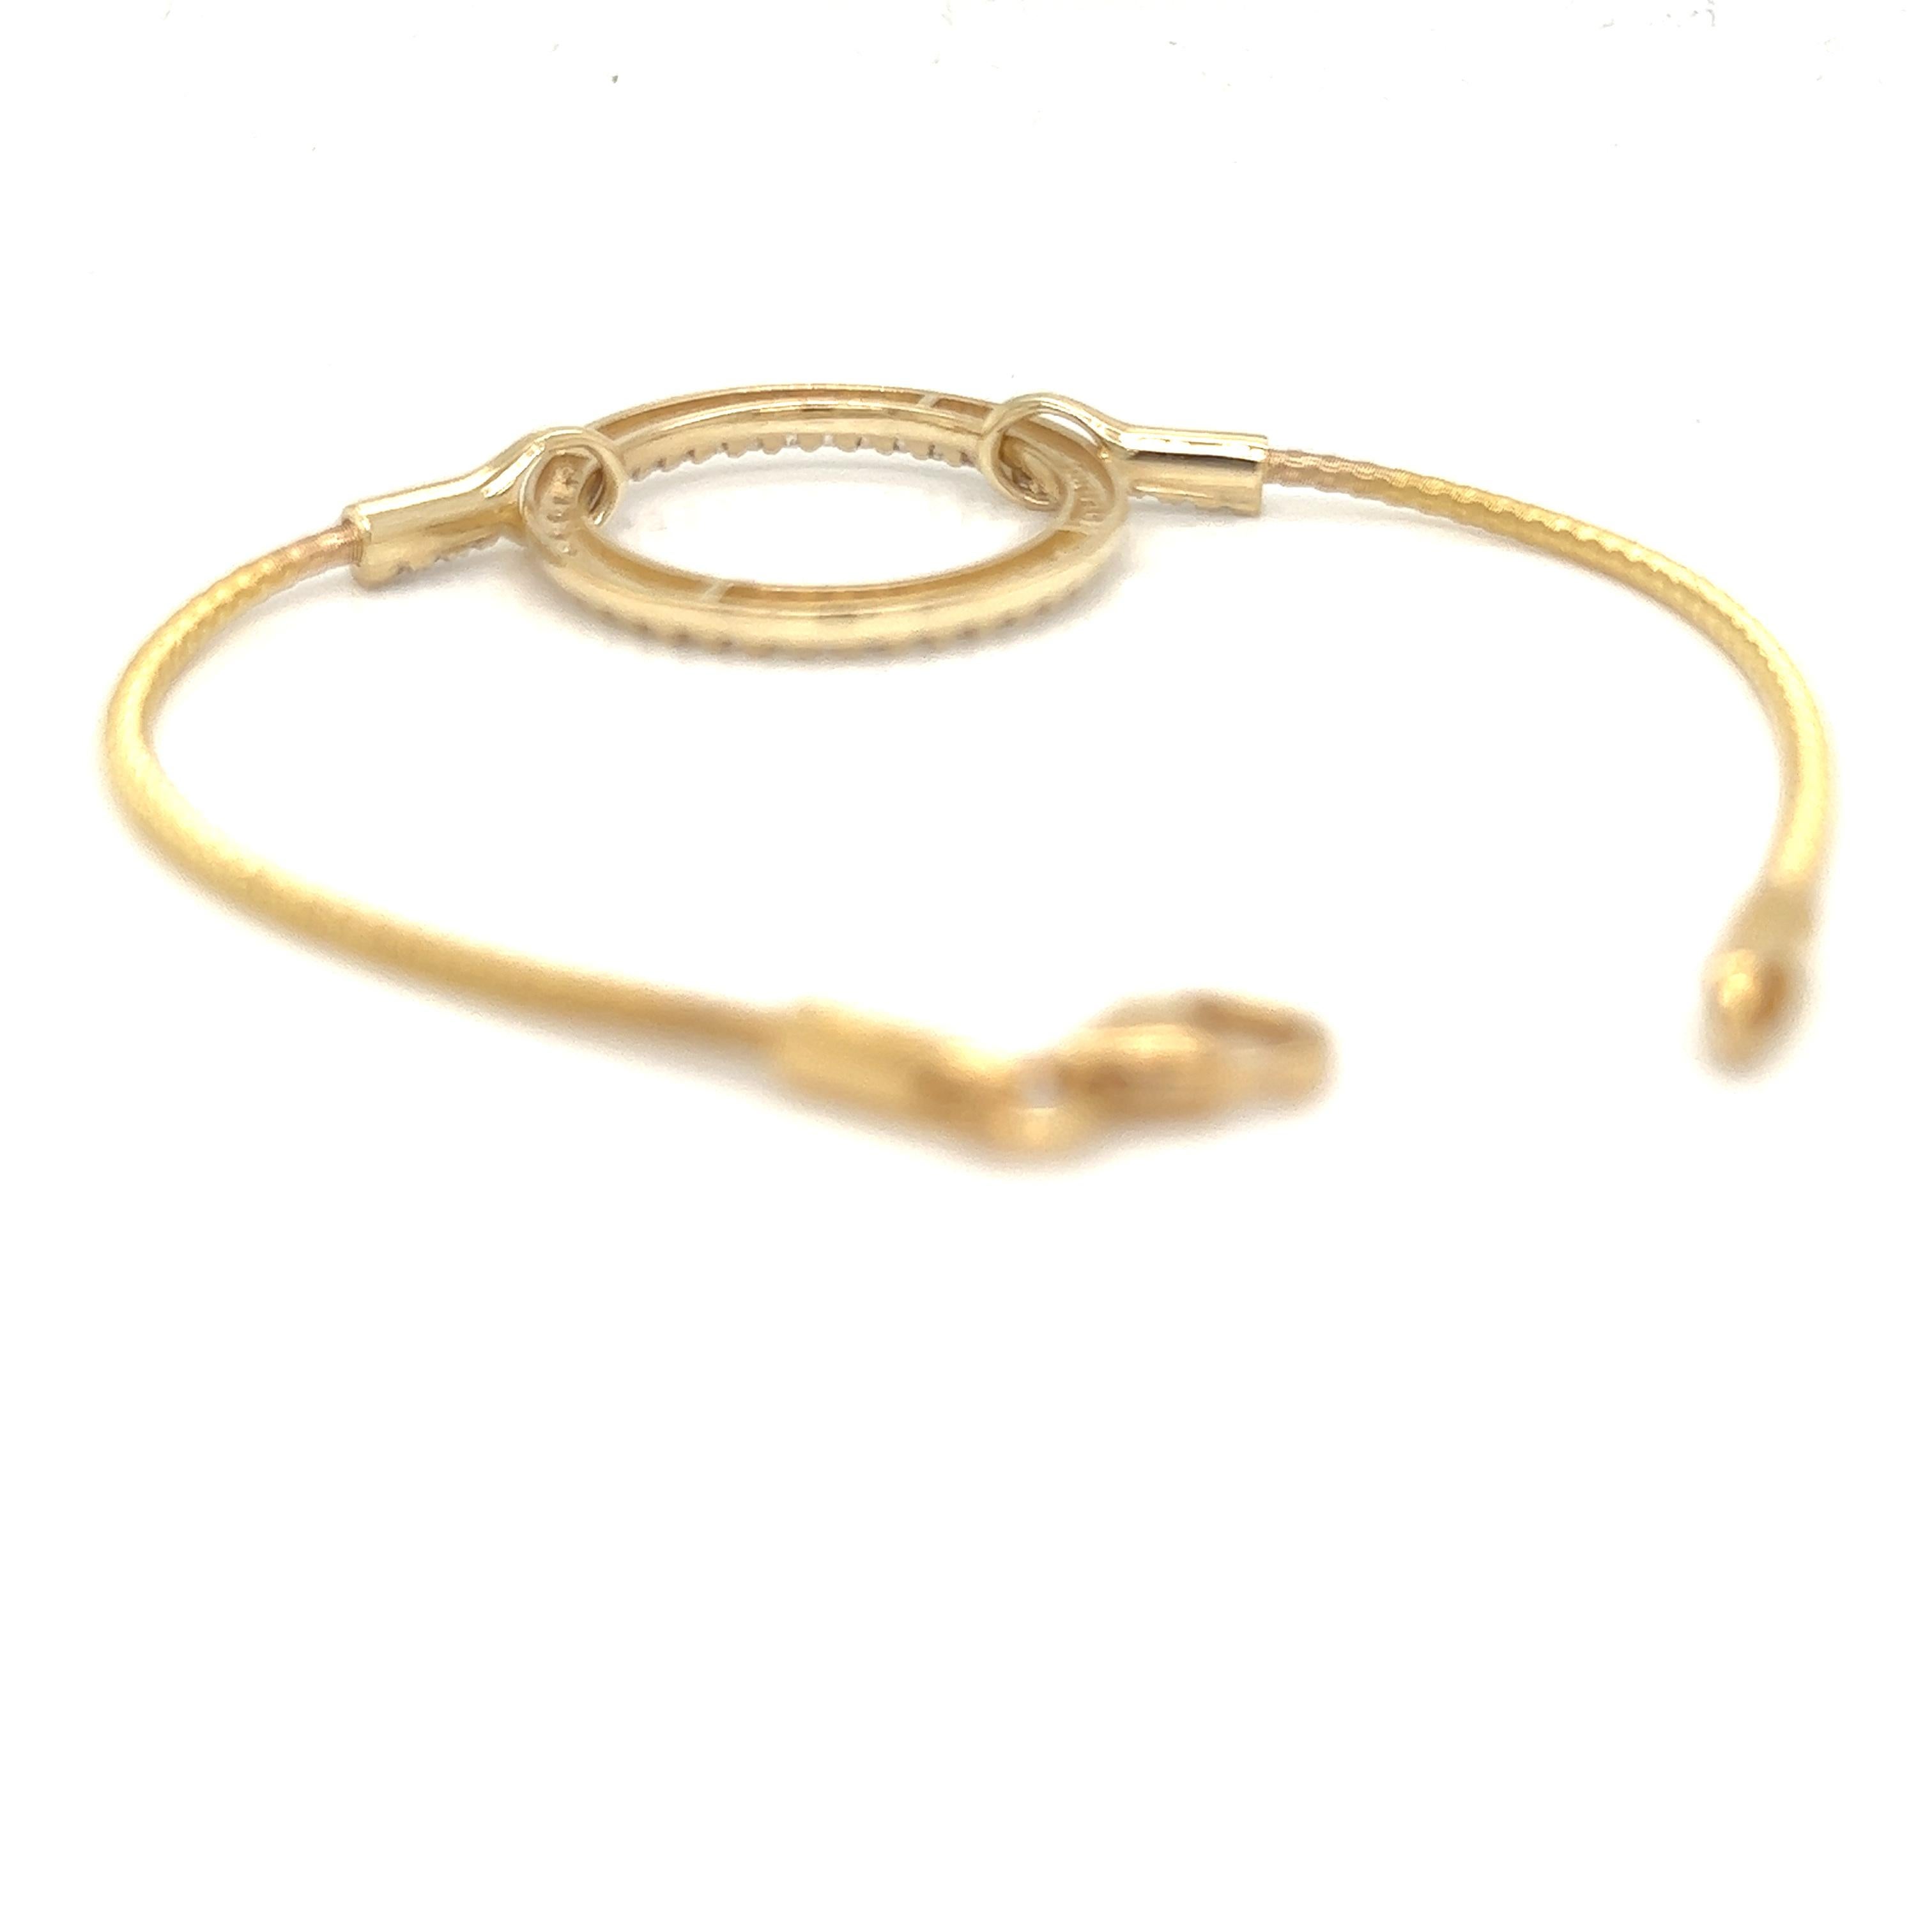 Women's Hand-Crafted 14K Yellow Gold Mesh Bracelet with an Open Diamond Circle Motif For Sale